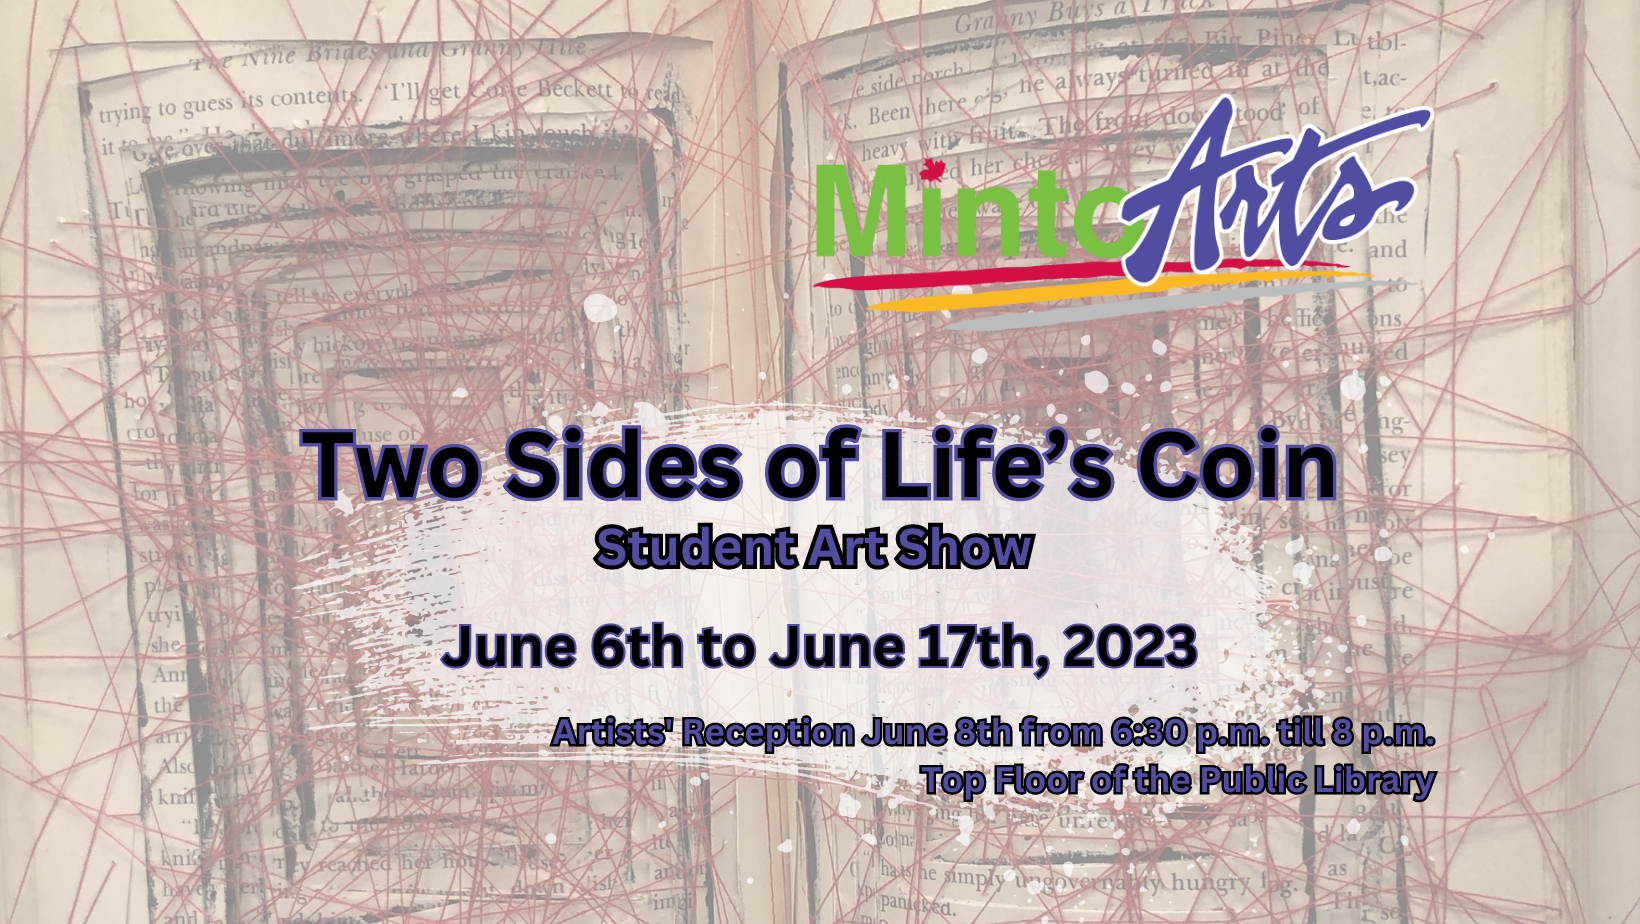 Two Sides of Life’s Coin - Student Art Show 2023